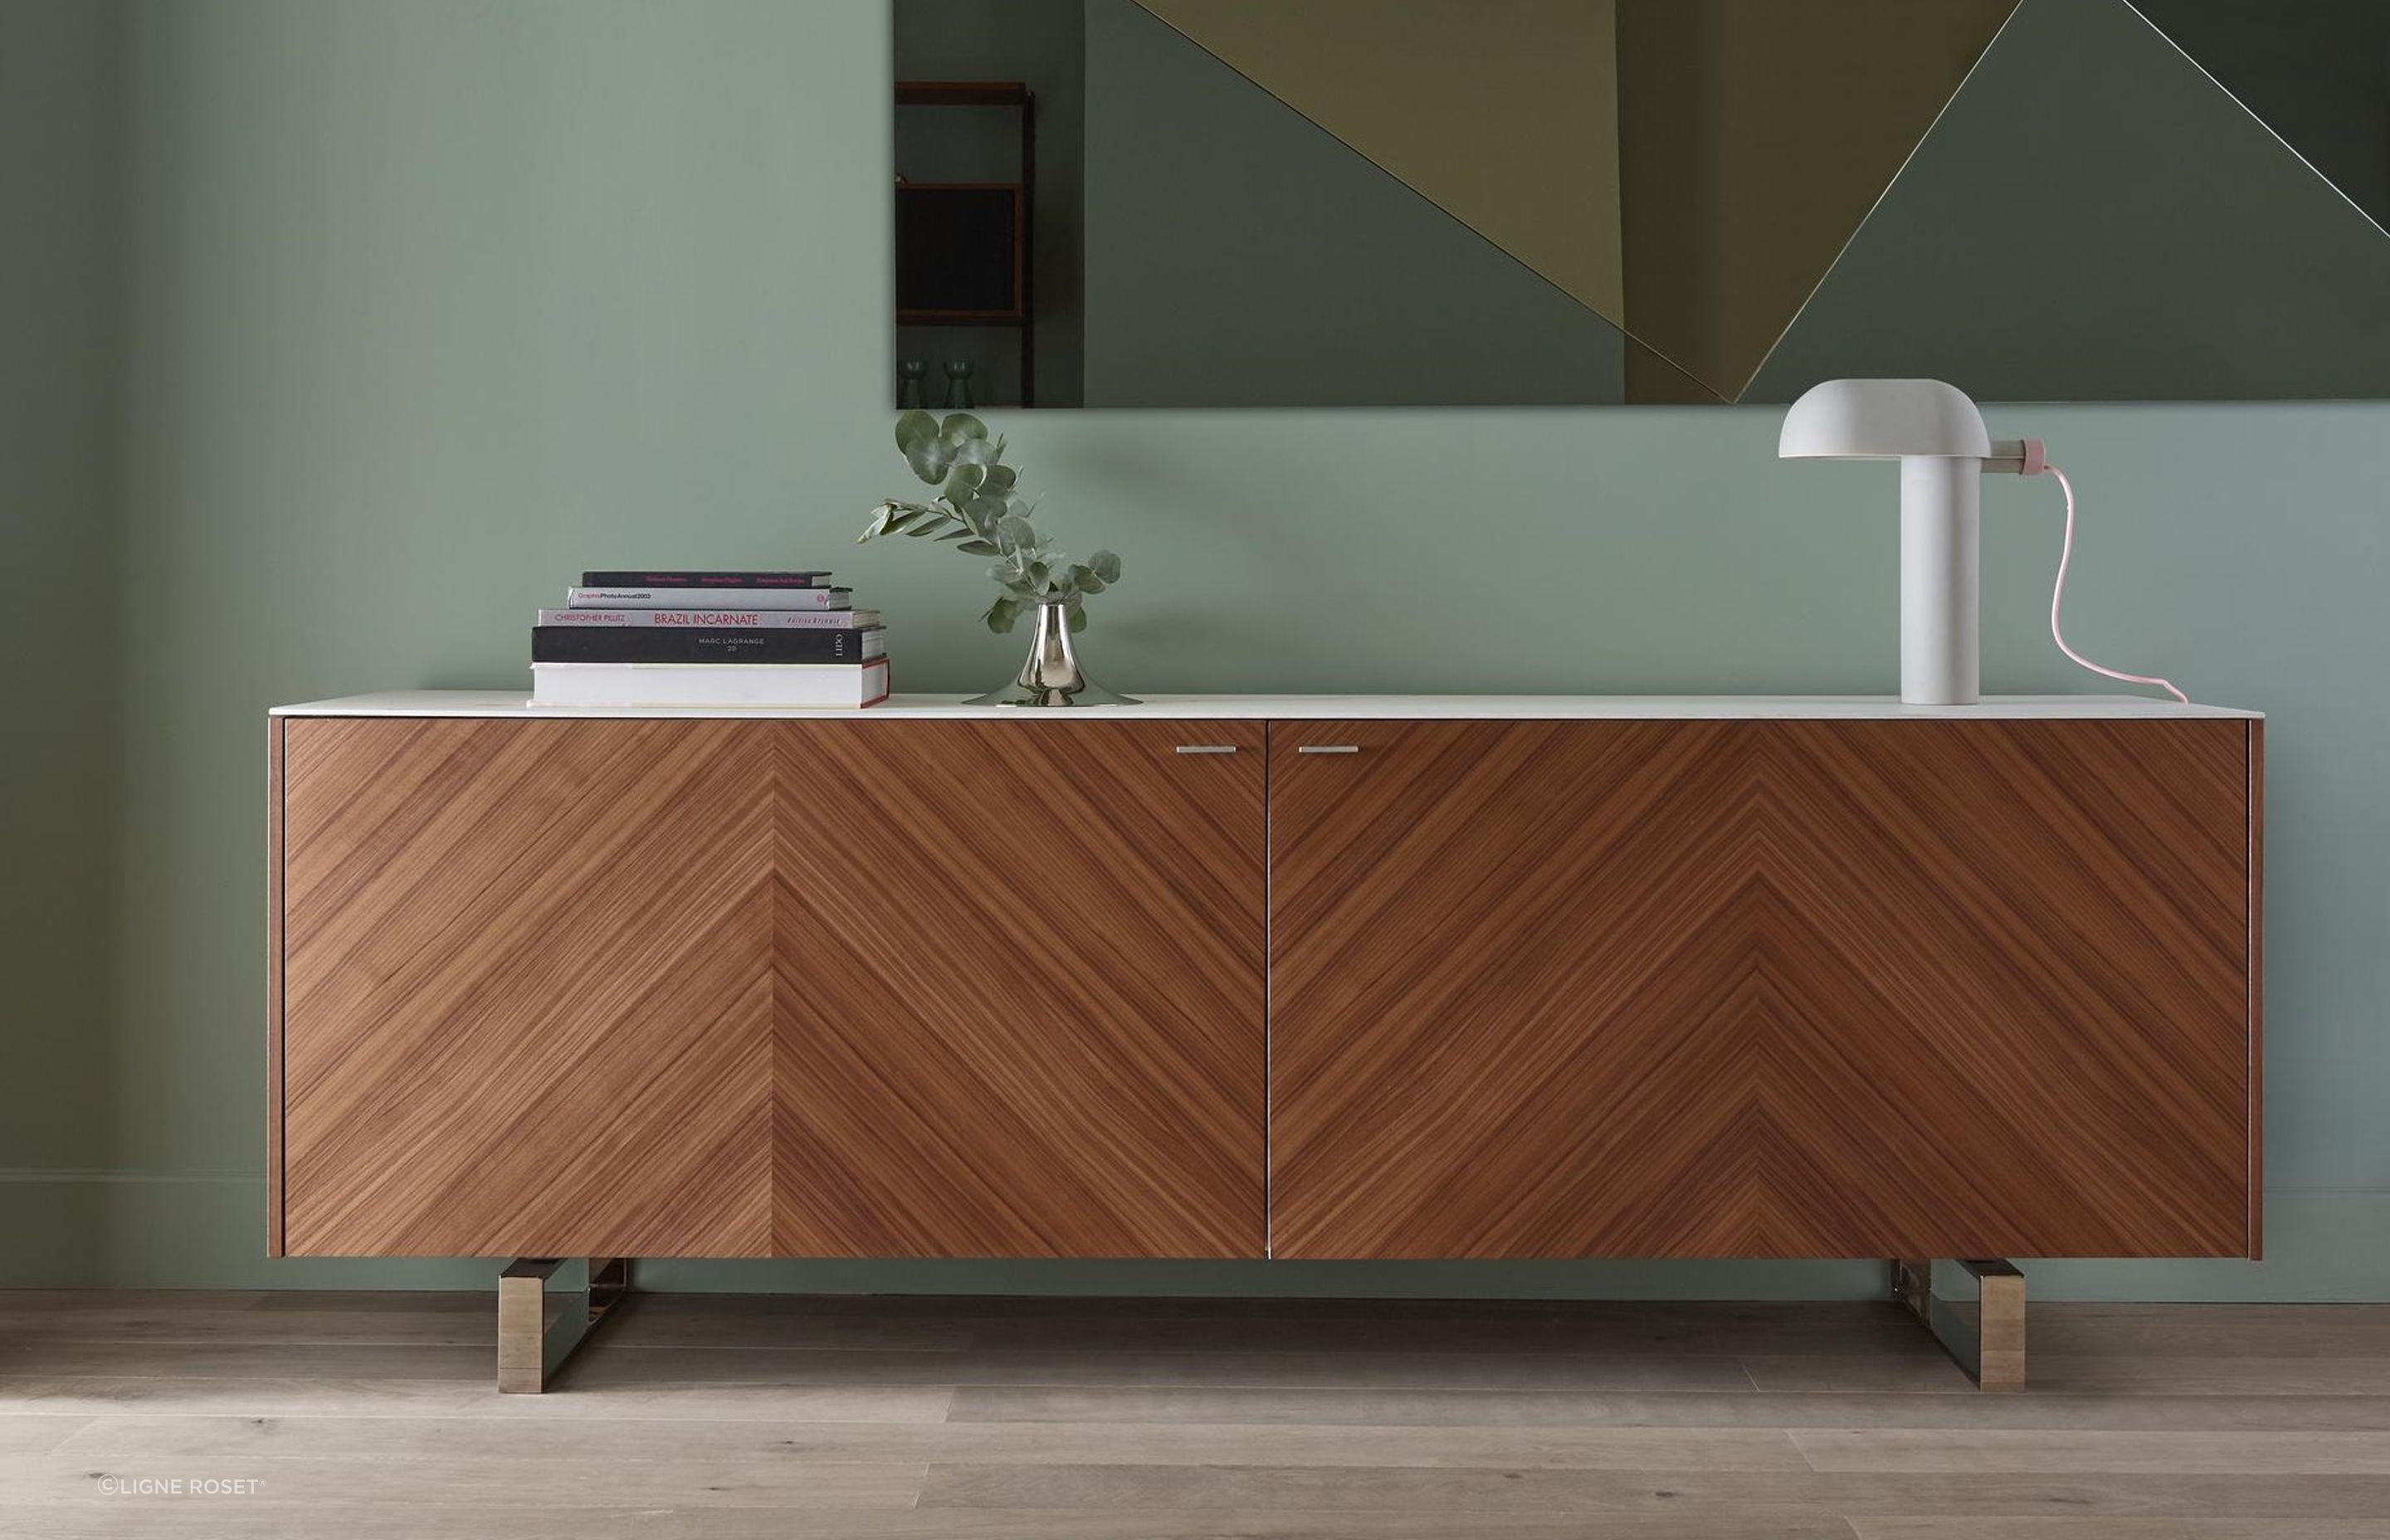 The distinctive coplanar doors is just one of the many outstanding features of the Coplan Sideboard by Pagnon &amp; Pelhaitre